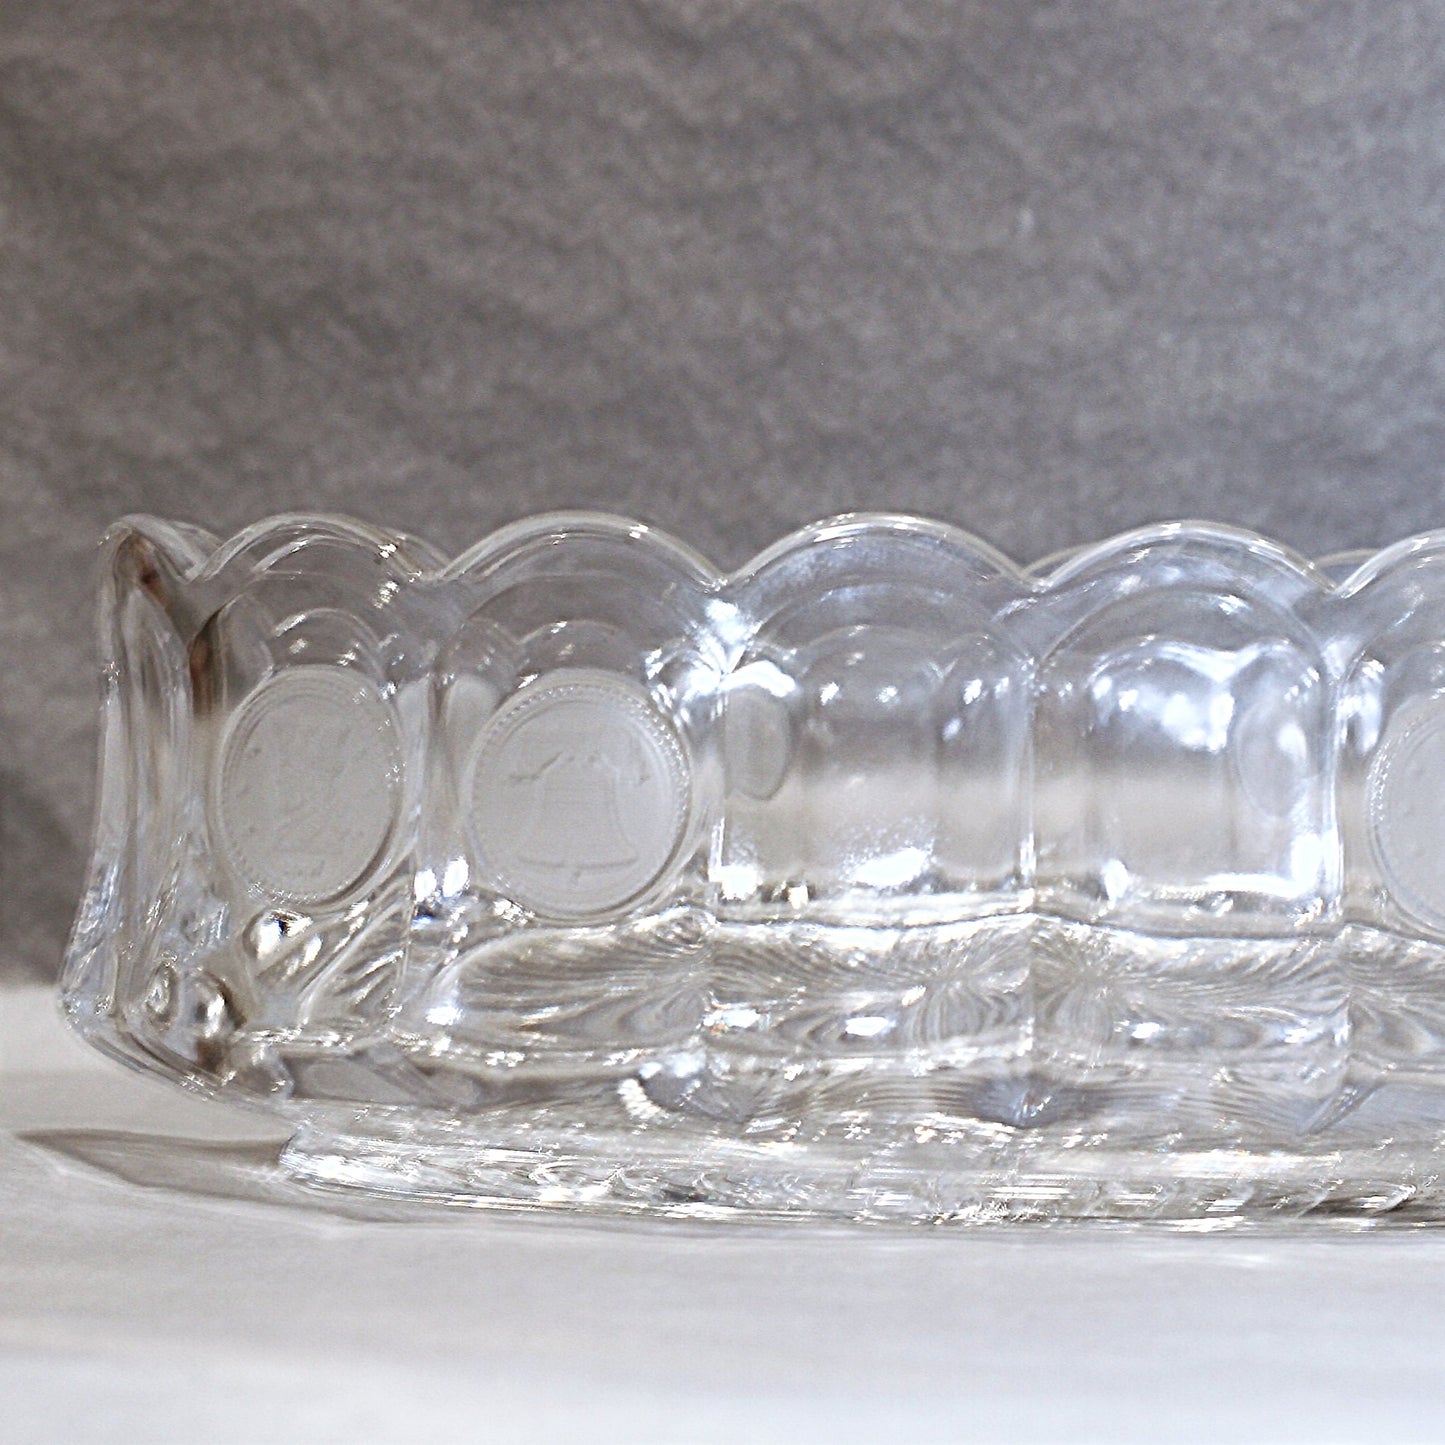 CLEAR COIN PATTERN Oval Bowl Circa 1958 - 1981